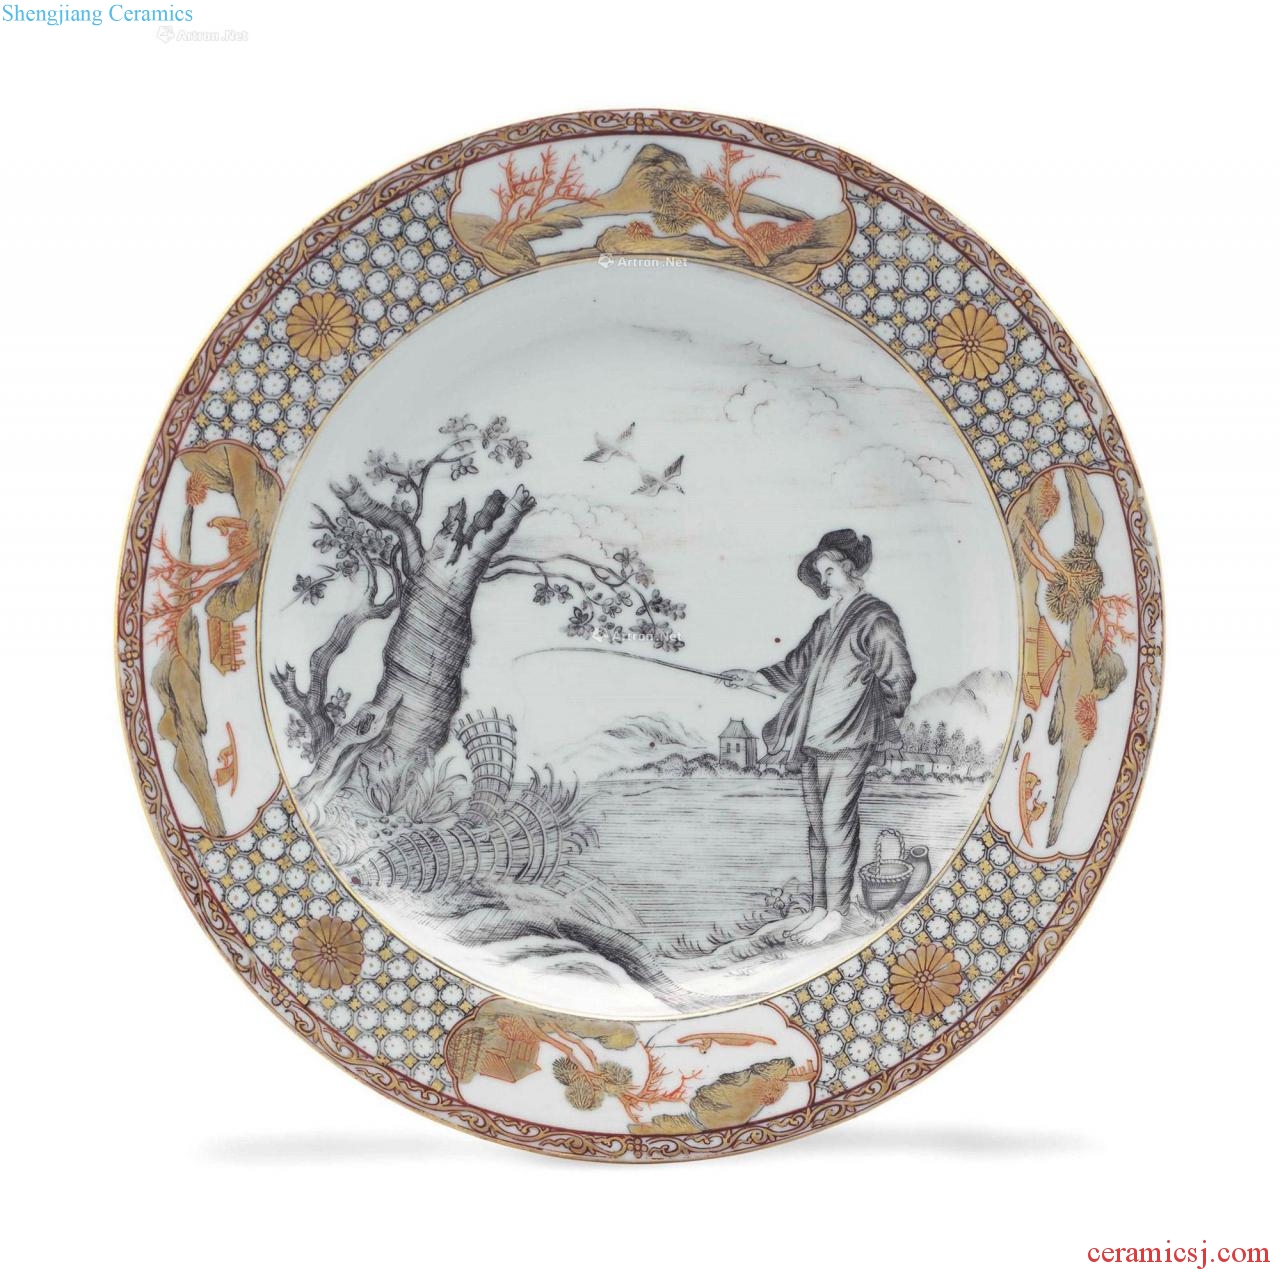 Qianlong period, about 1750 A GRISAILLE AND GILT "FISHERMAN" PLATE